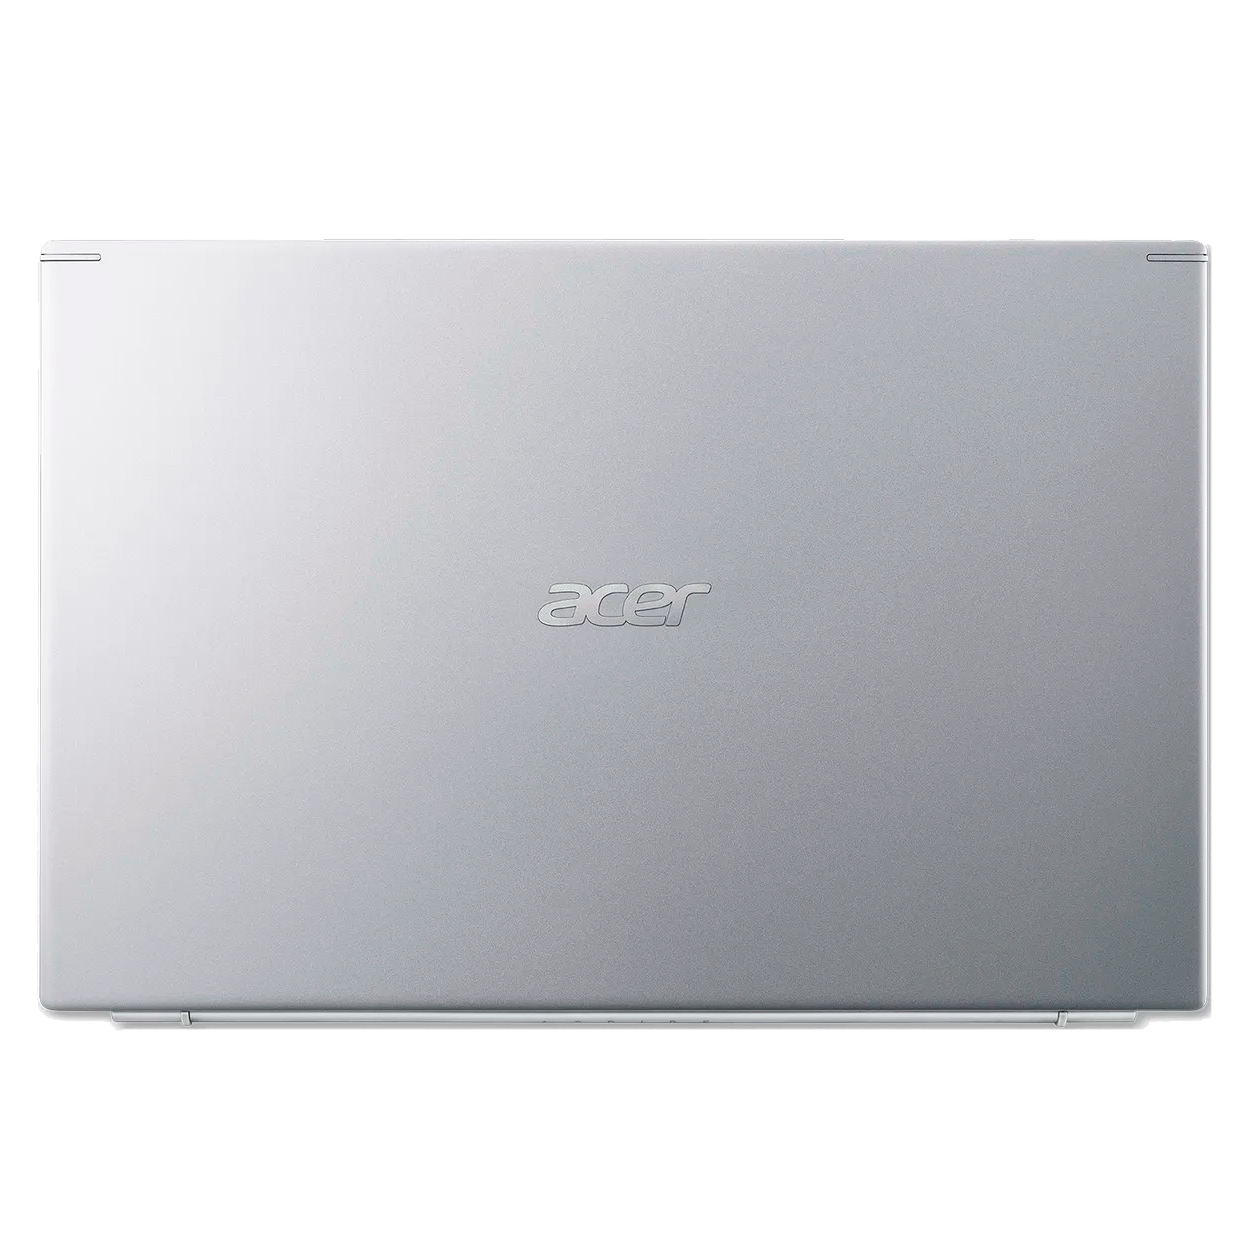 Asus i3 1115g4. Acer Spin 3 sp314-54n. ASUS VIVOBOOK x543ba-dm624. Ноутбук Acer Aspire 3 a315-23. ASUS r565ma-br203t.